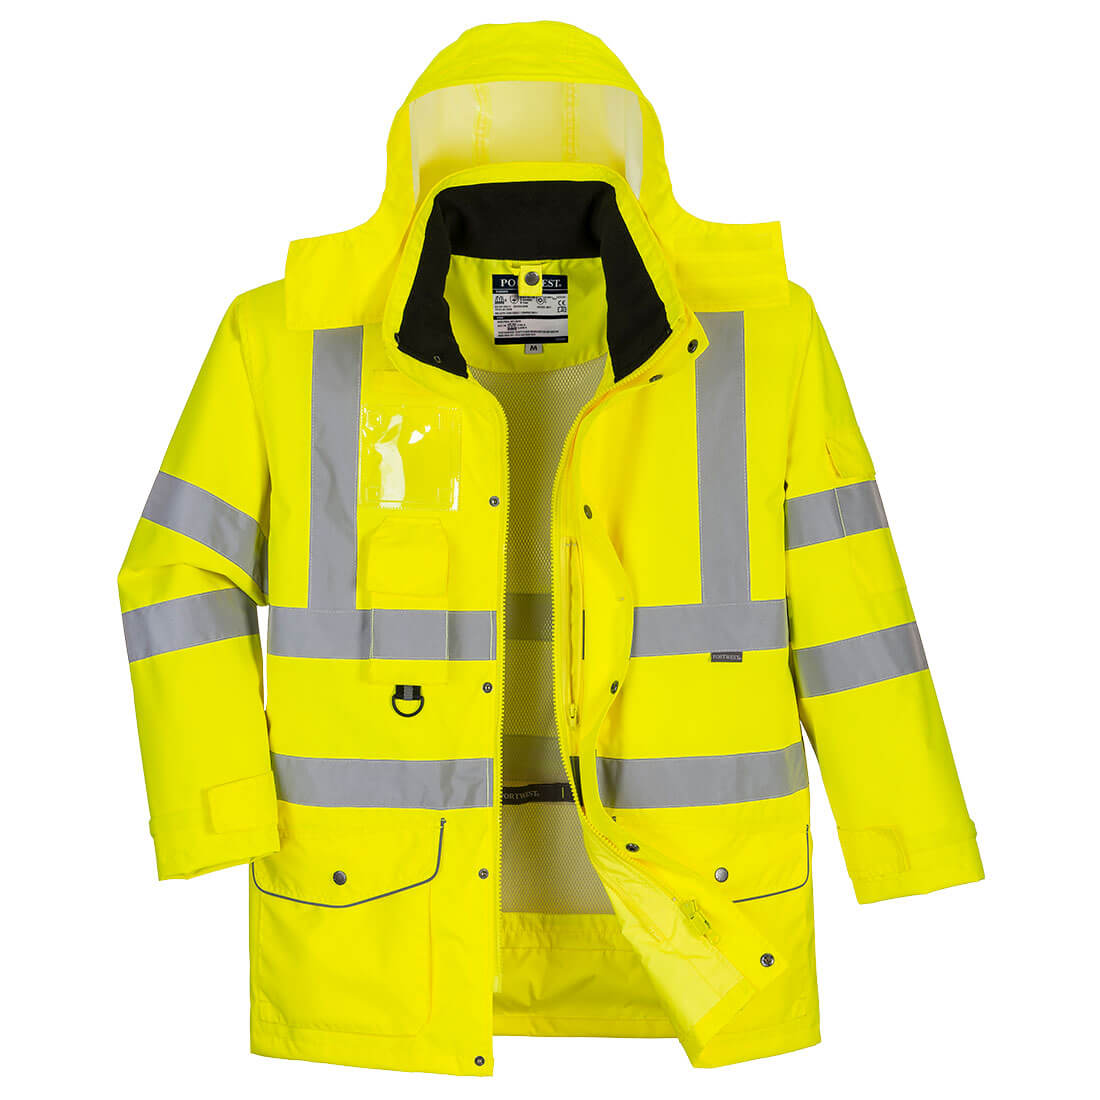 Hi-Vis 7in1 Jacket, Yellow     Size 4XL R/Fit